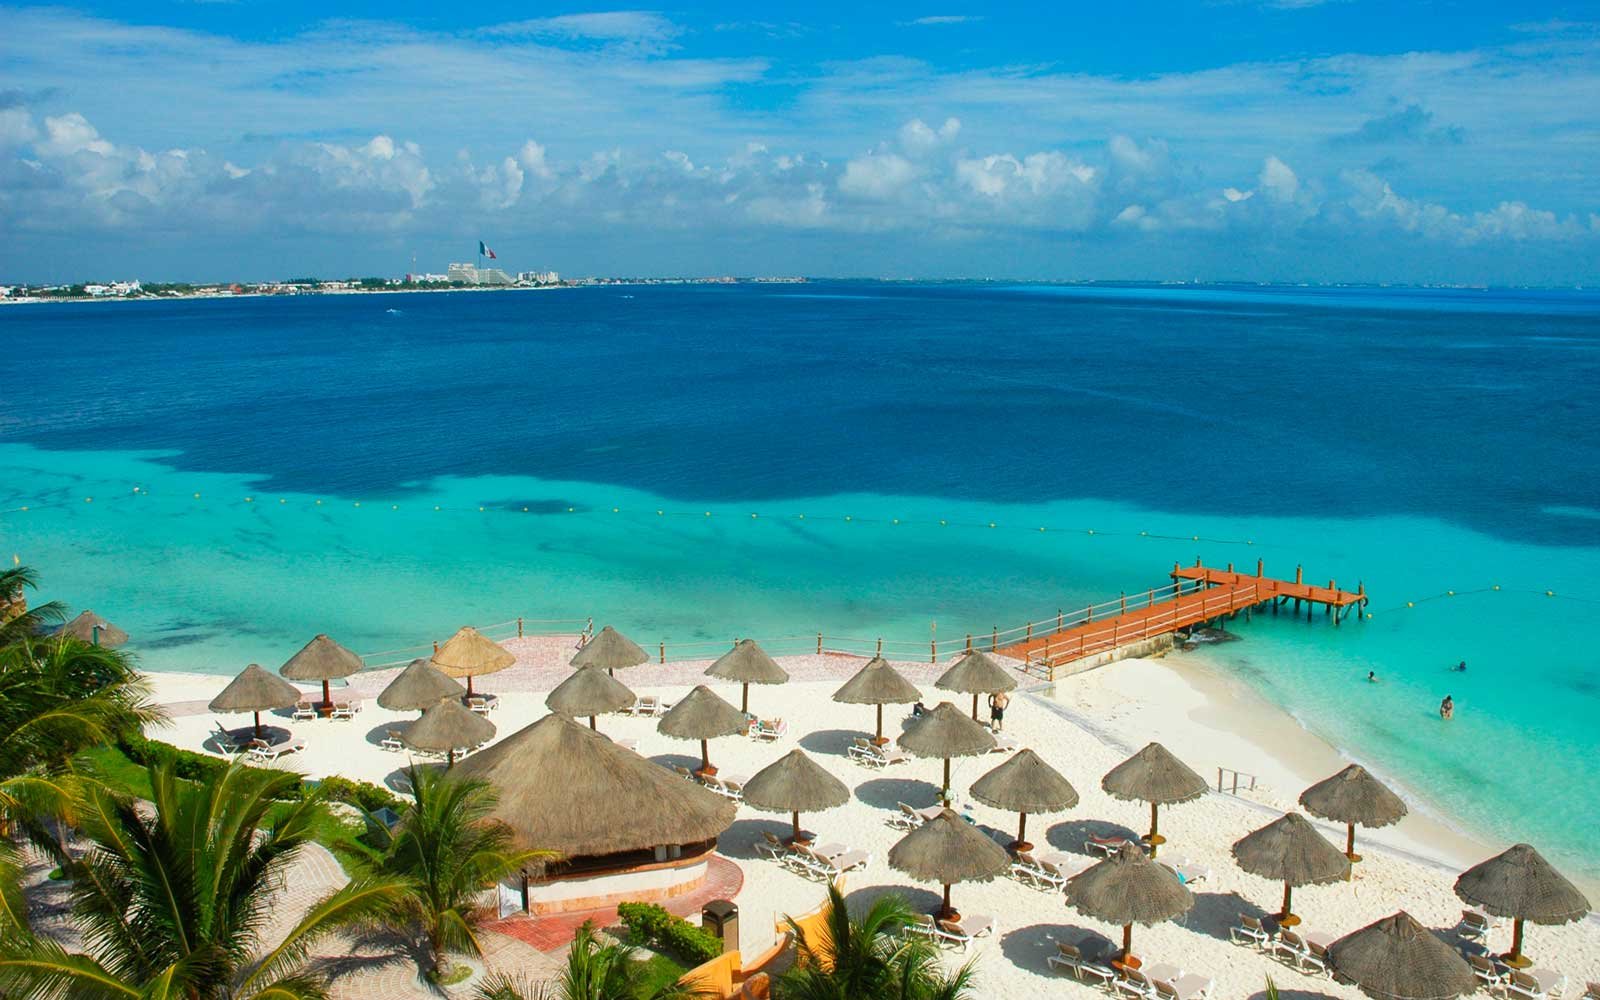 Houston to Cancun Mexico $191 RT Nonstop Airfares on United Airlines BE (Travel November - April 2023)